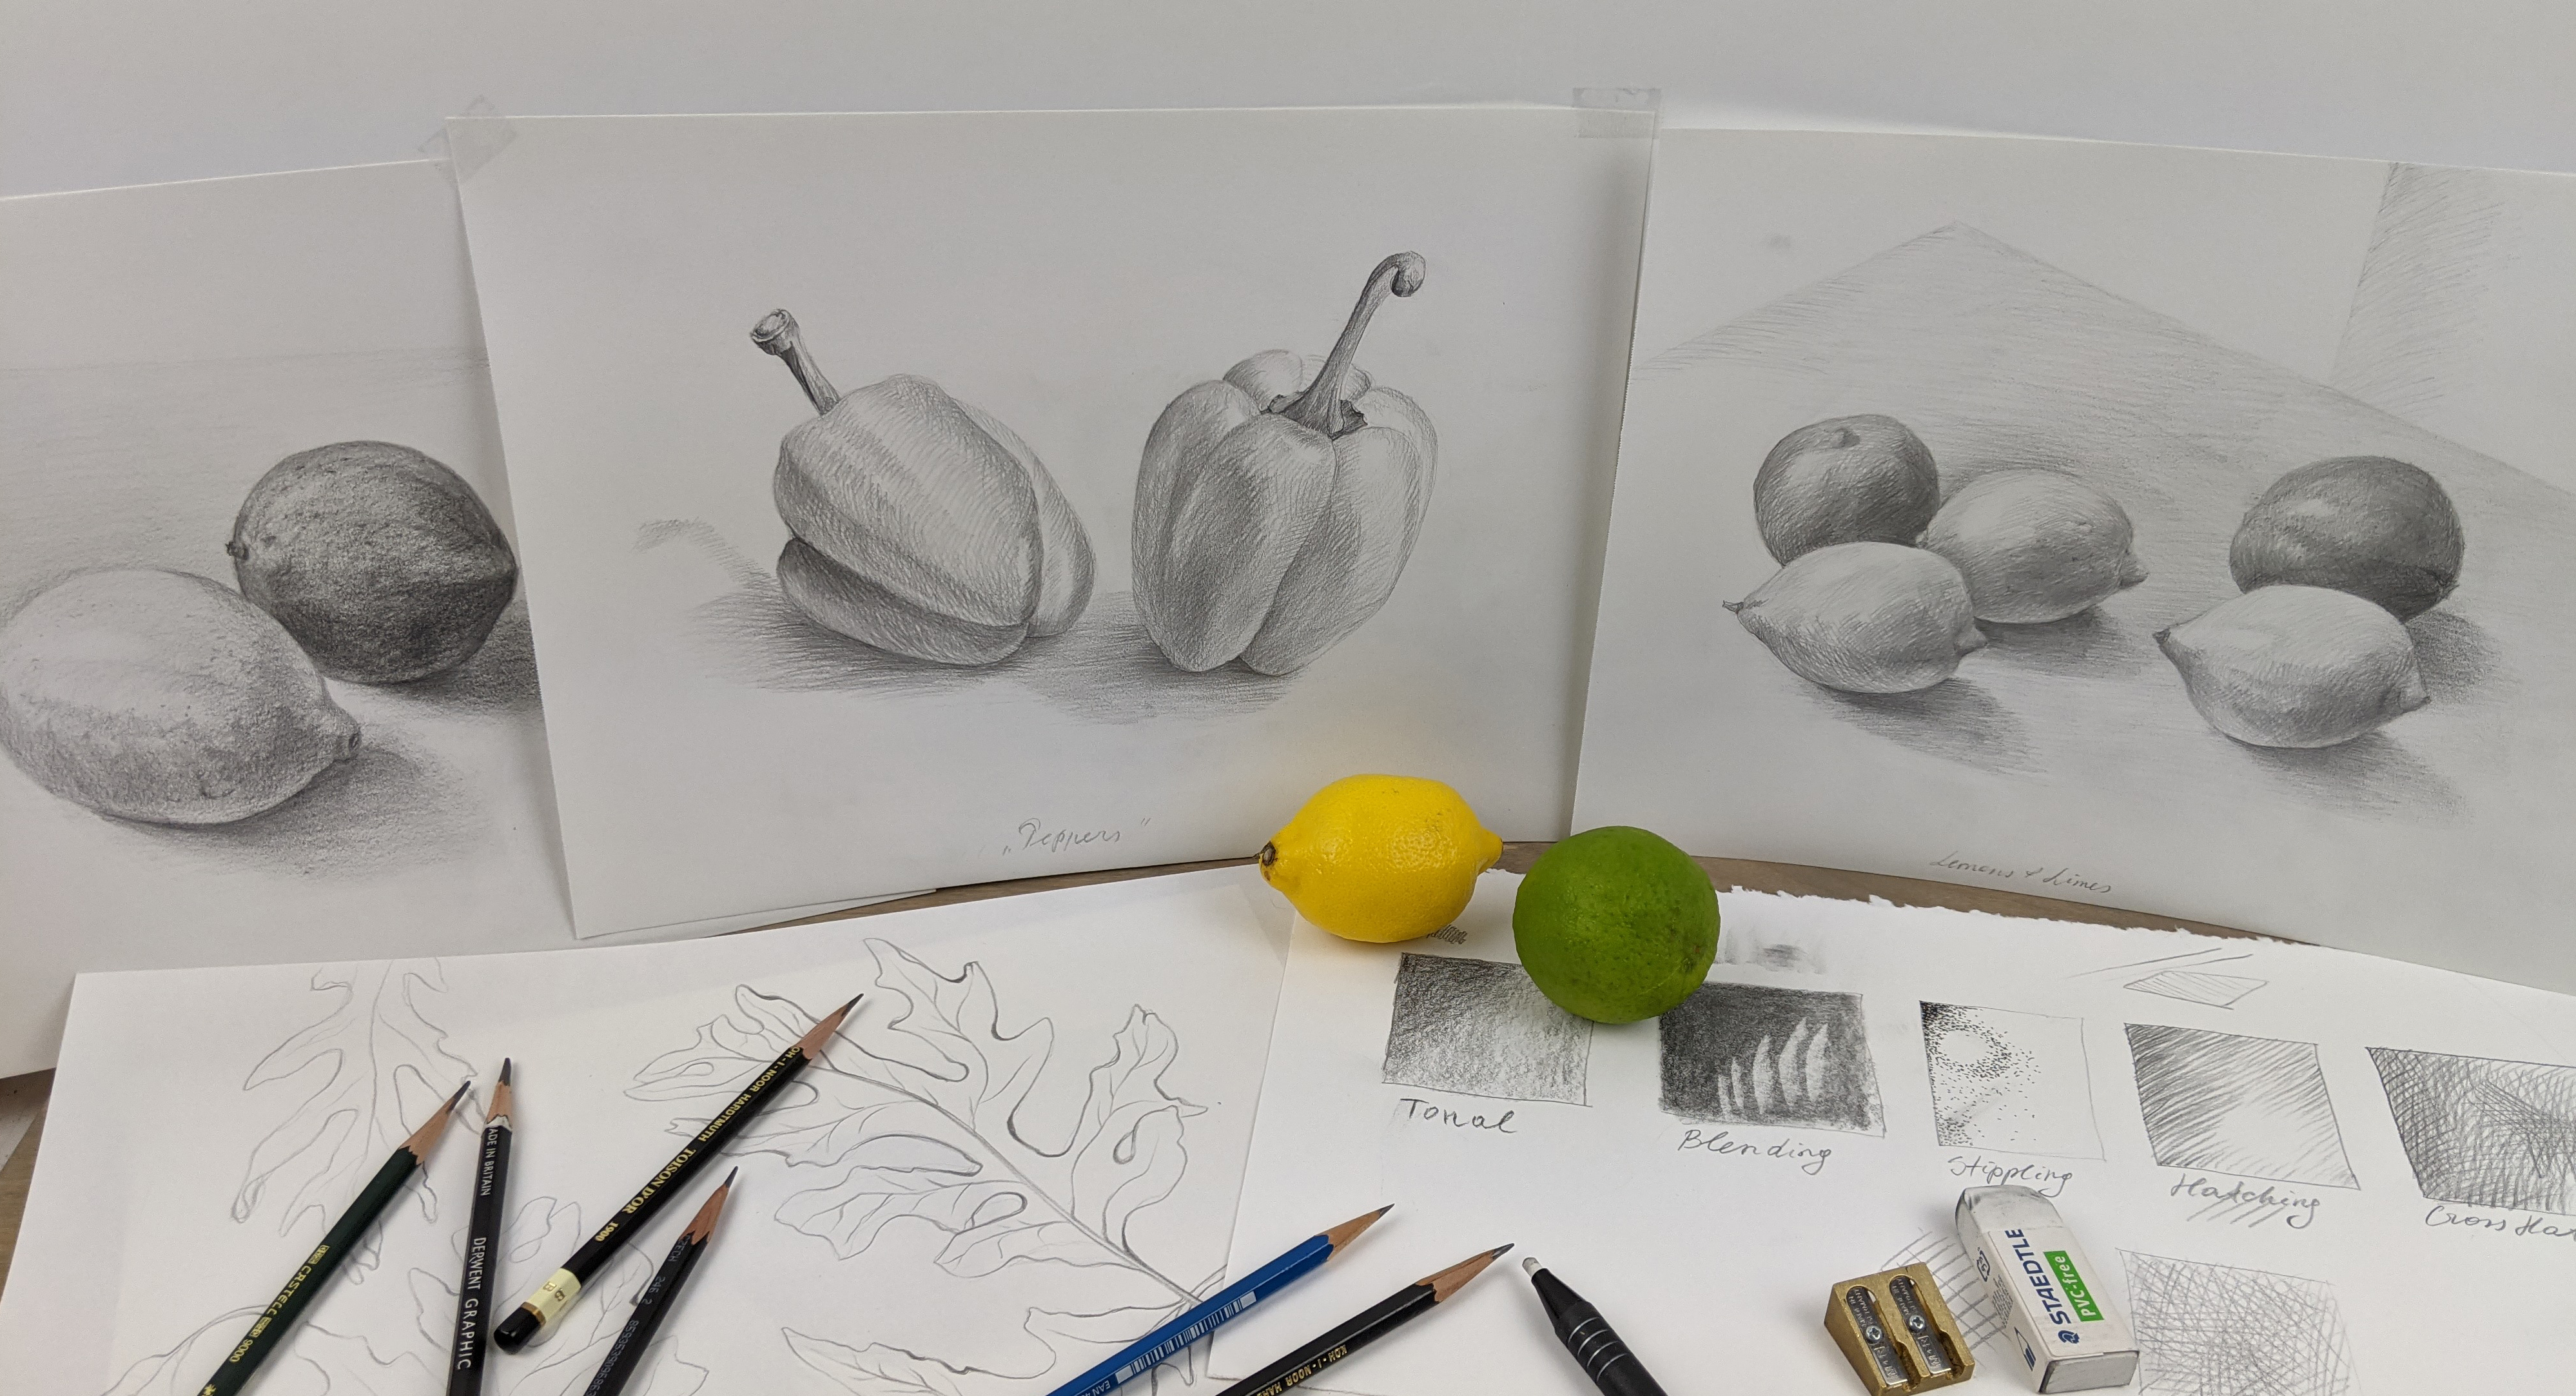 Artists: Learn 10 New Drawing Habits, Fresh Perspectives and Goals